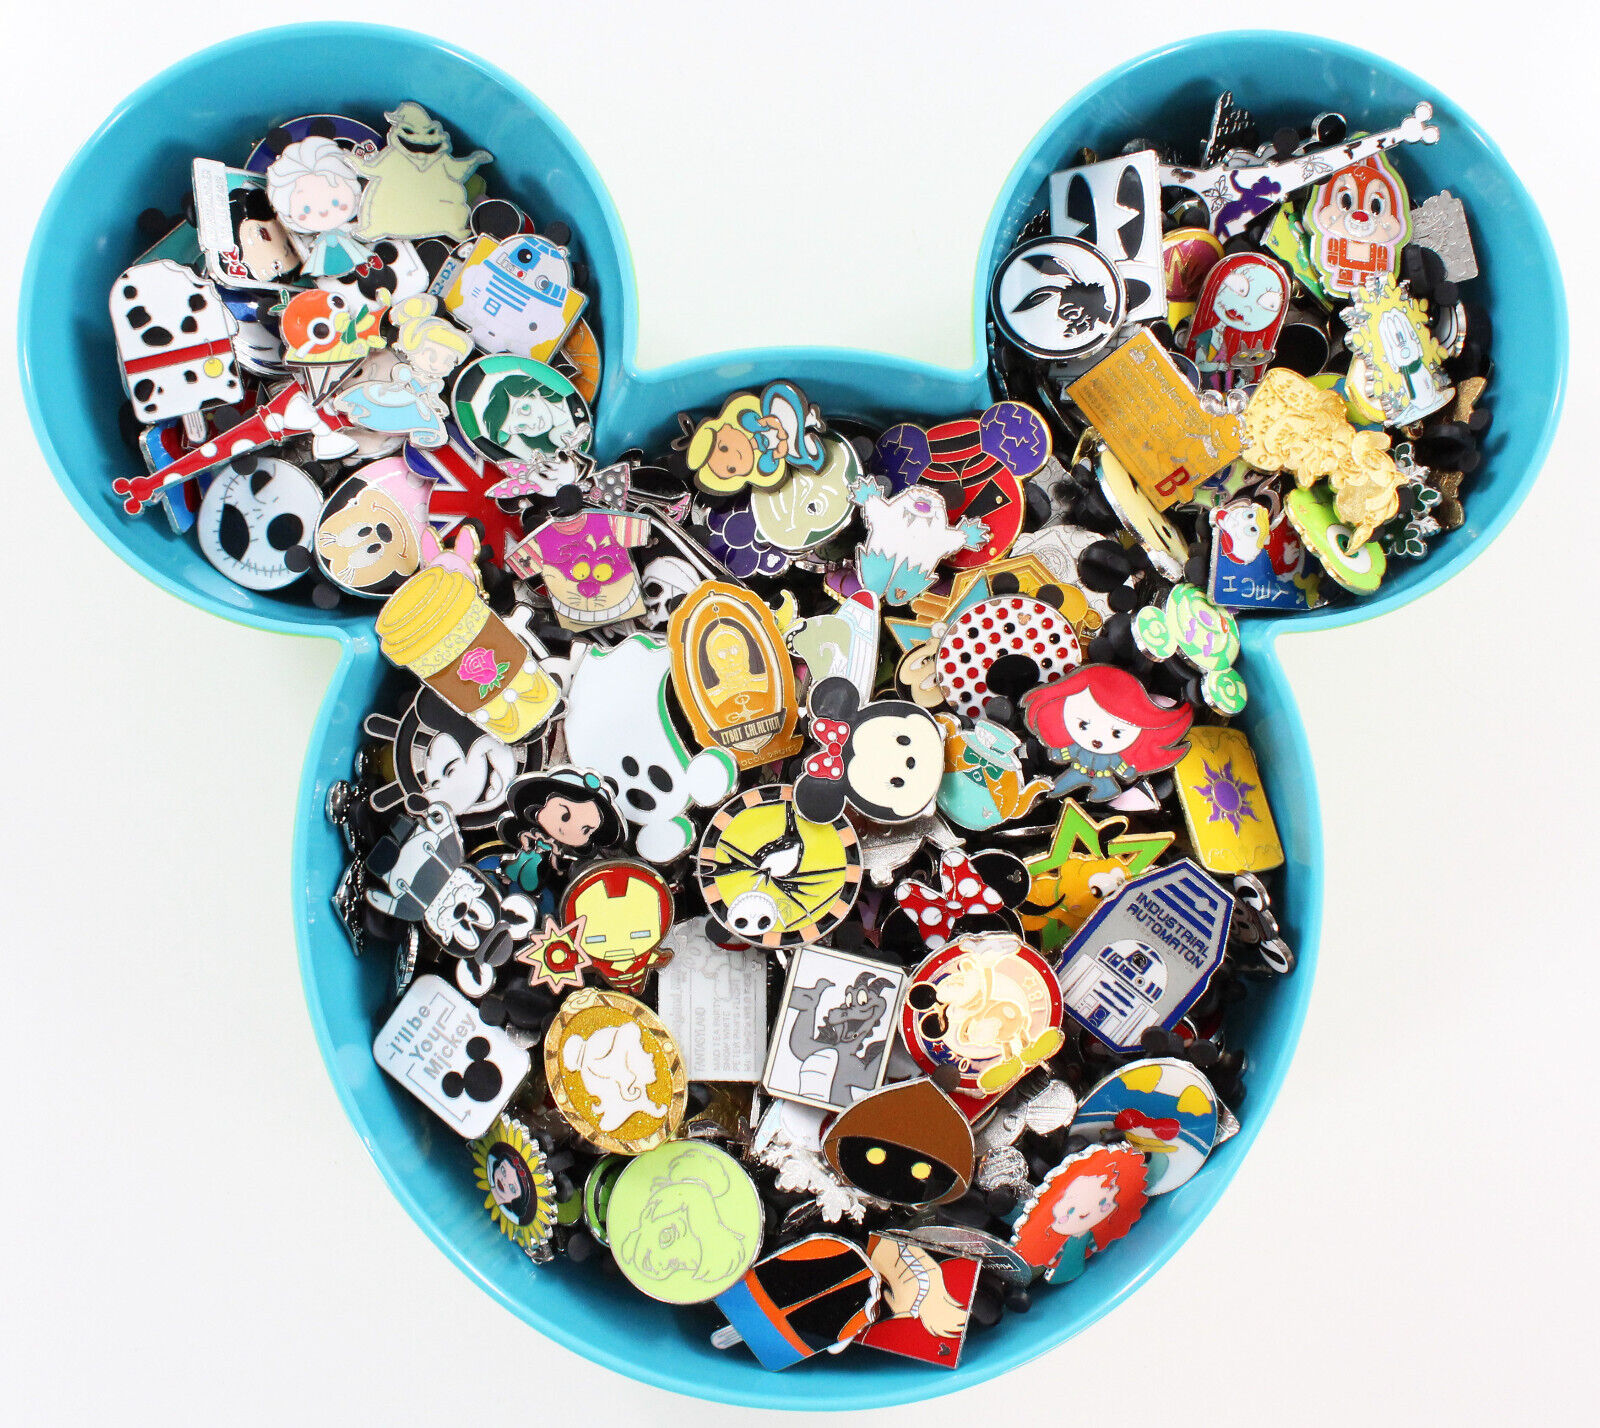 Disney Trading Pins - You Pick Size Up to 500 Pins With No Duplicates